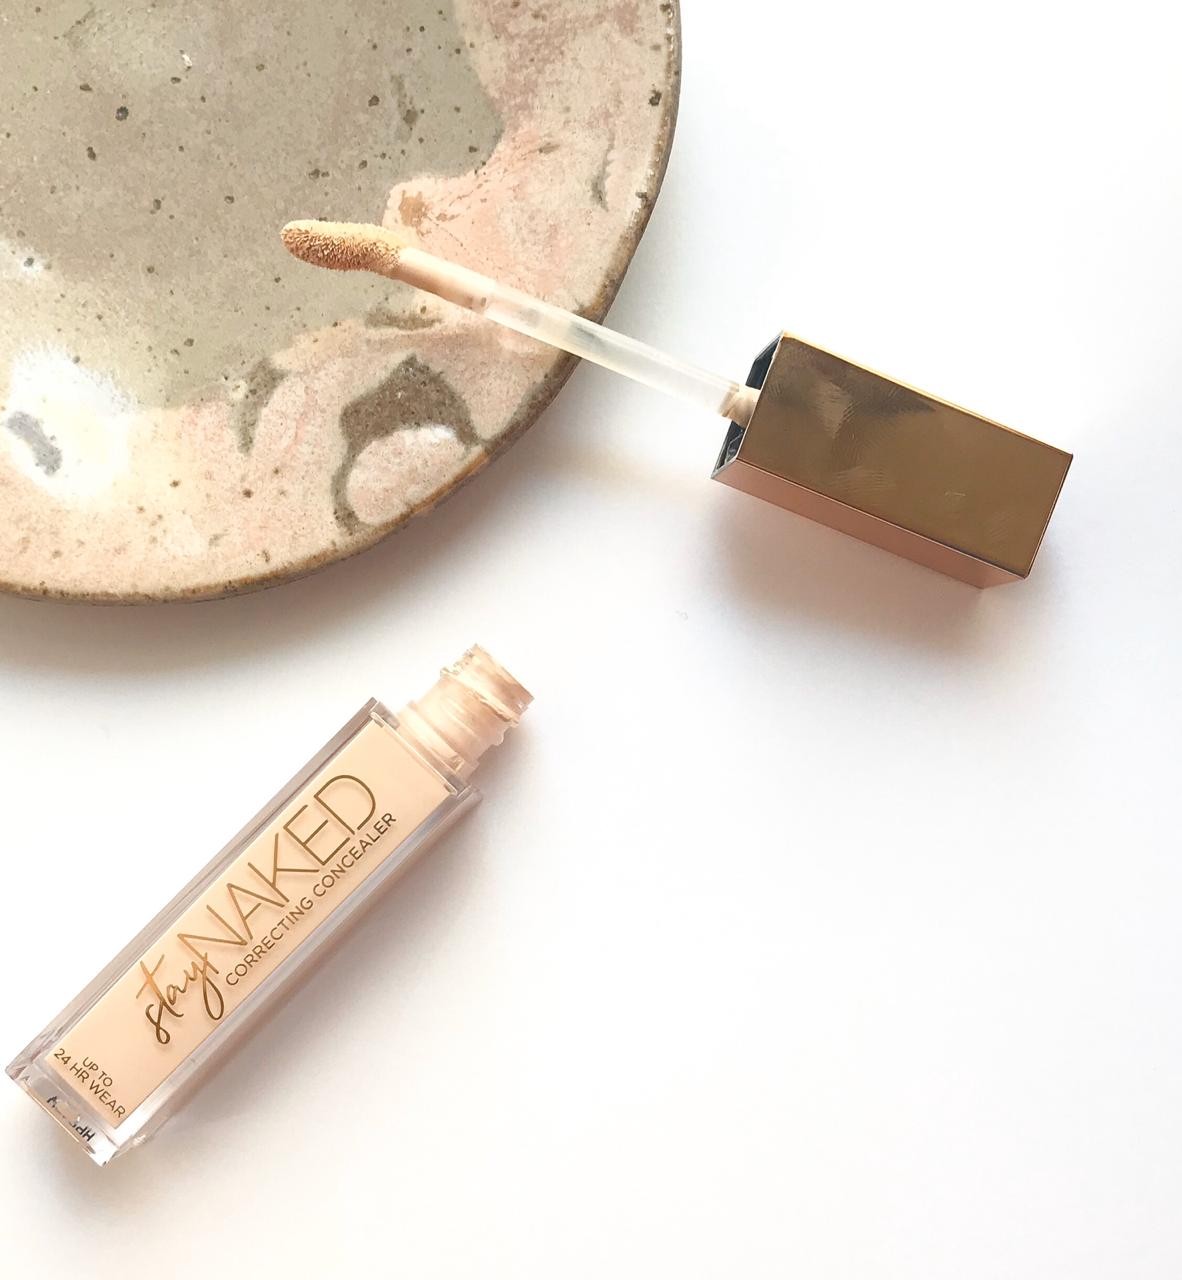 Corretivo Stay Naked Correcting Concealer, Urban Decay (Foto: Acervo Pessoal)